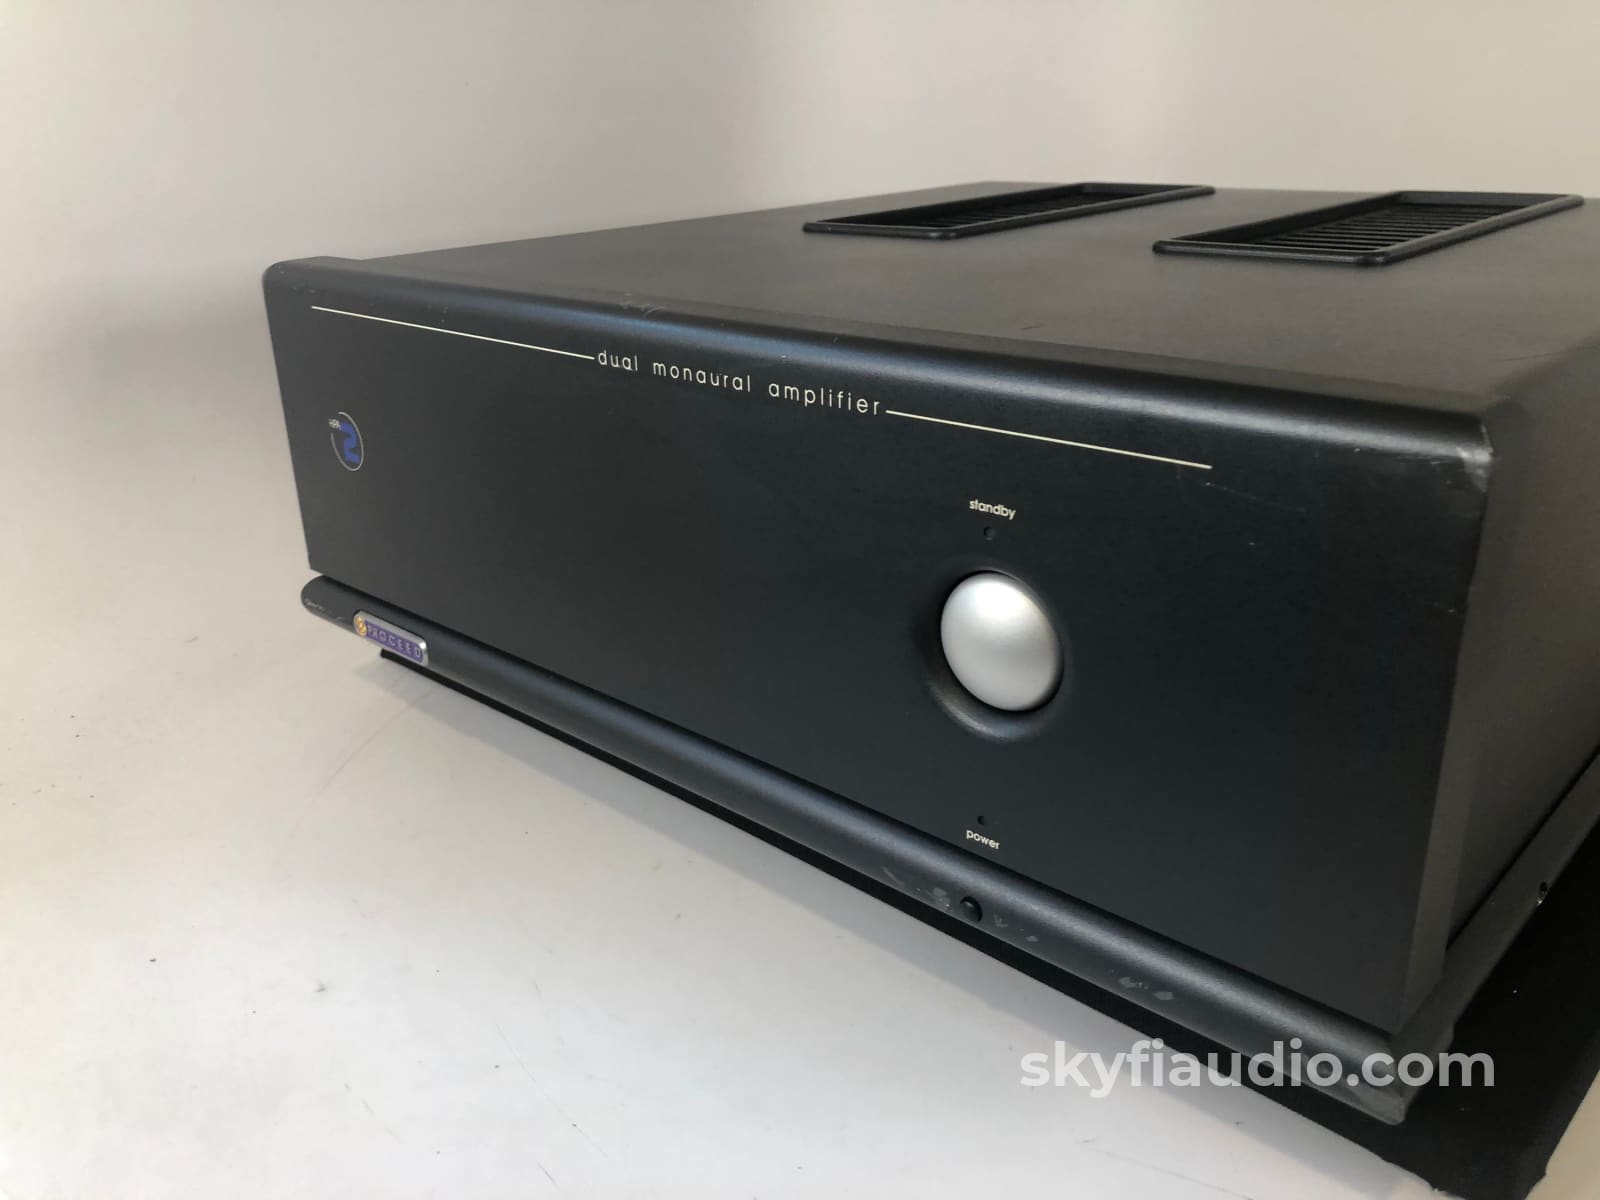 Proceed Hpa2 Amplifier From Mark Levinson - Perfect For Home Theater Or Stereo 250W X 2